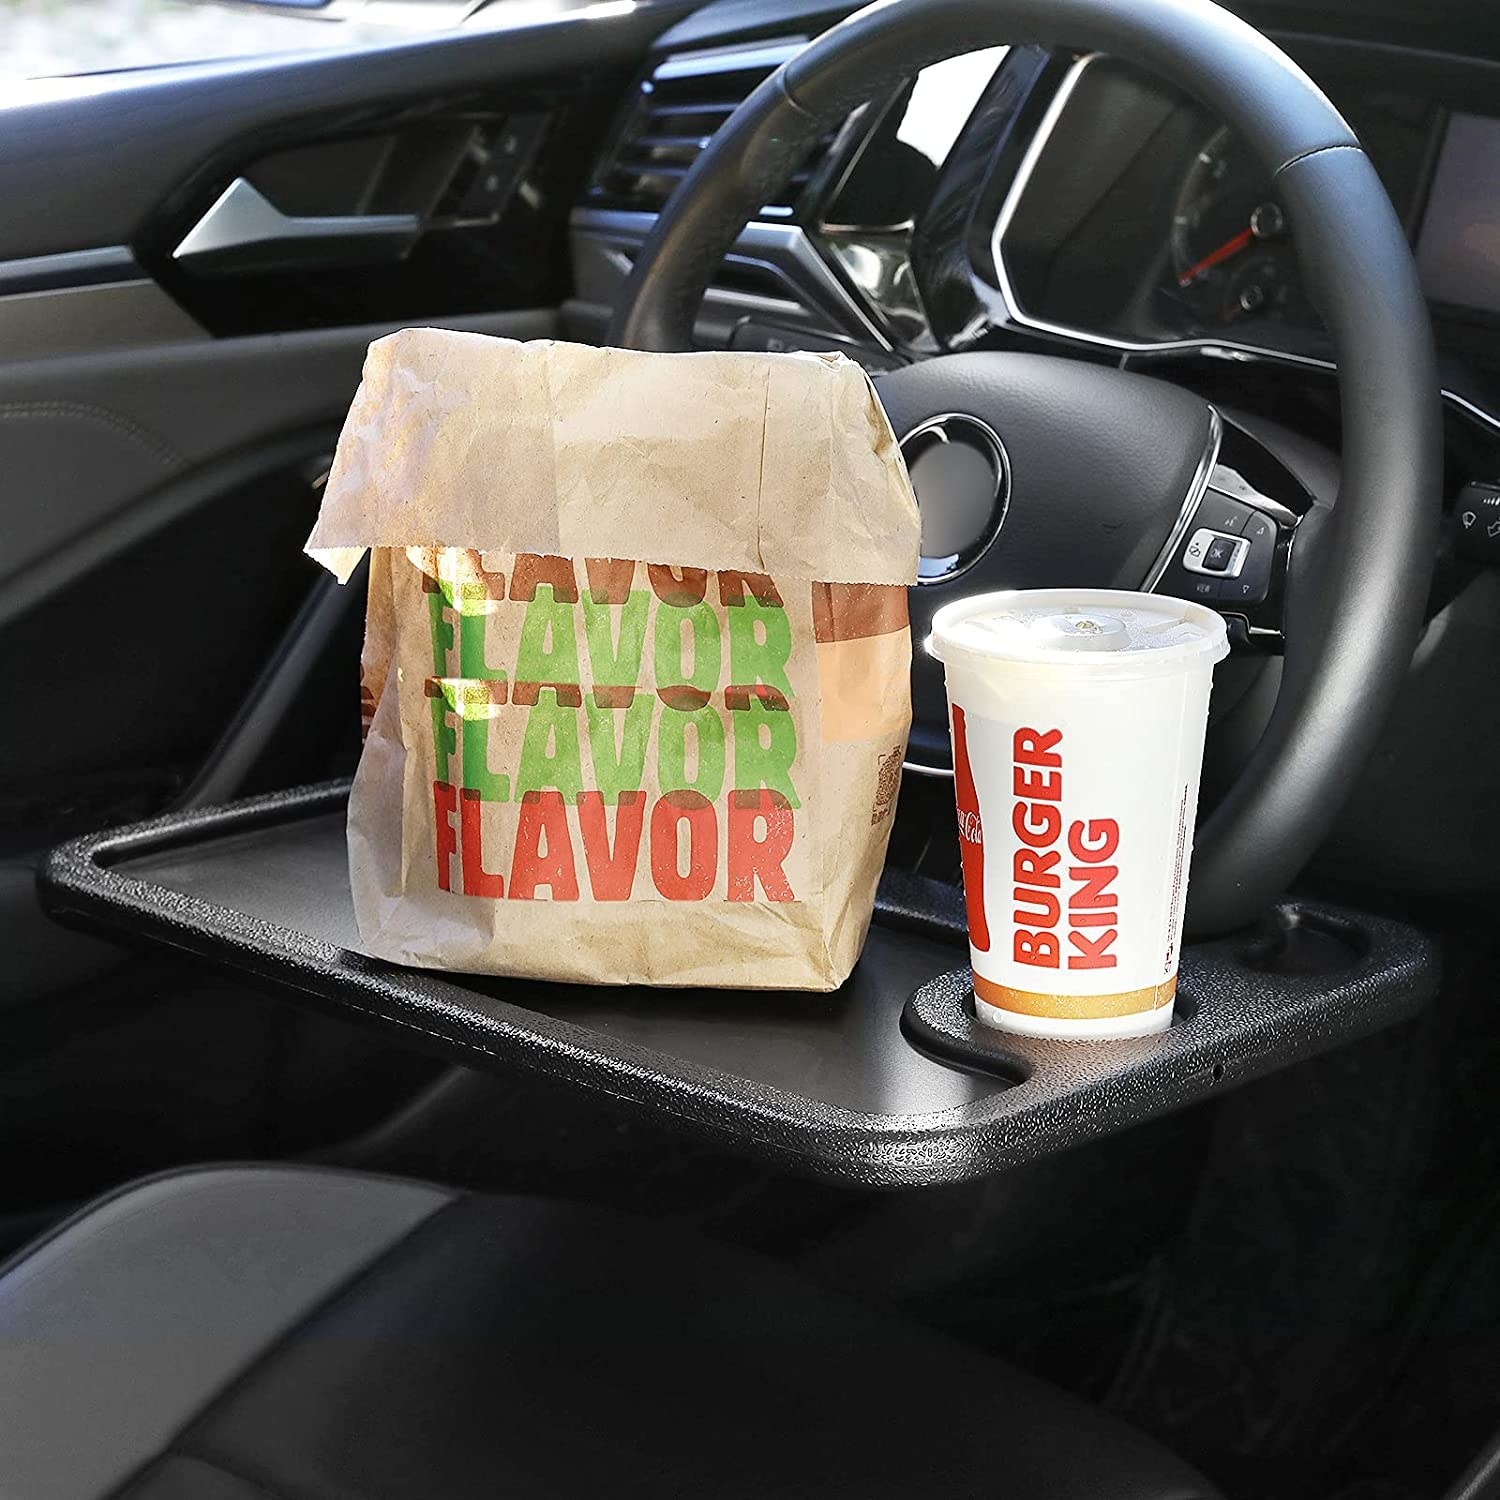 The tray with Burger King on it